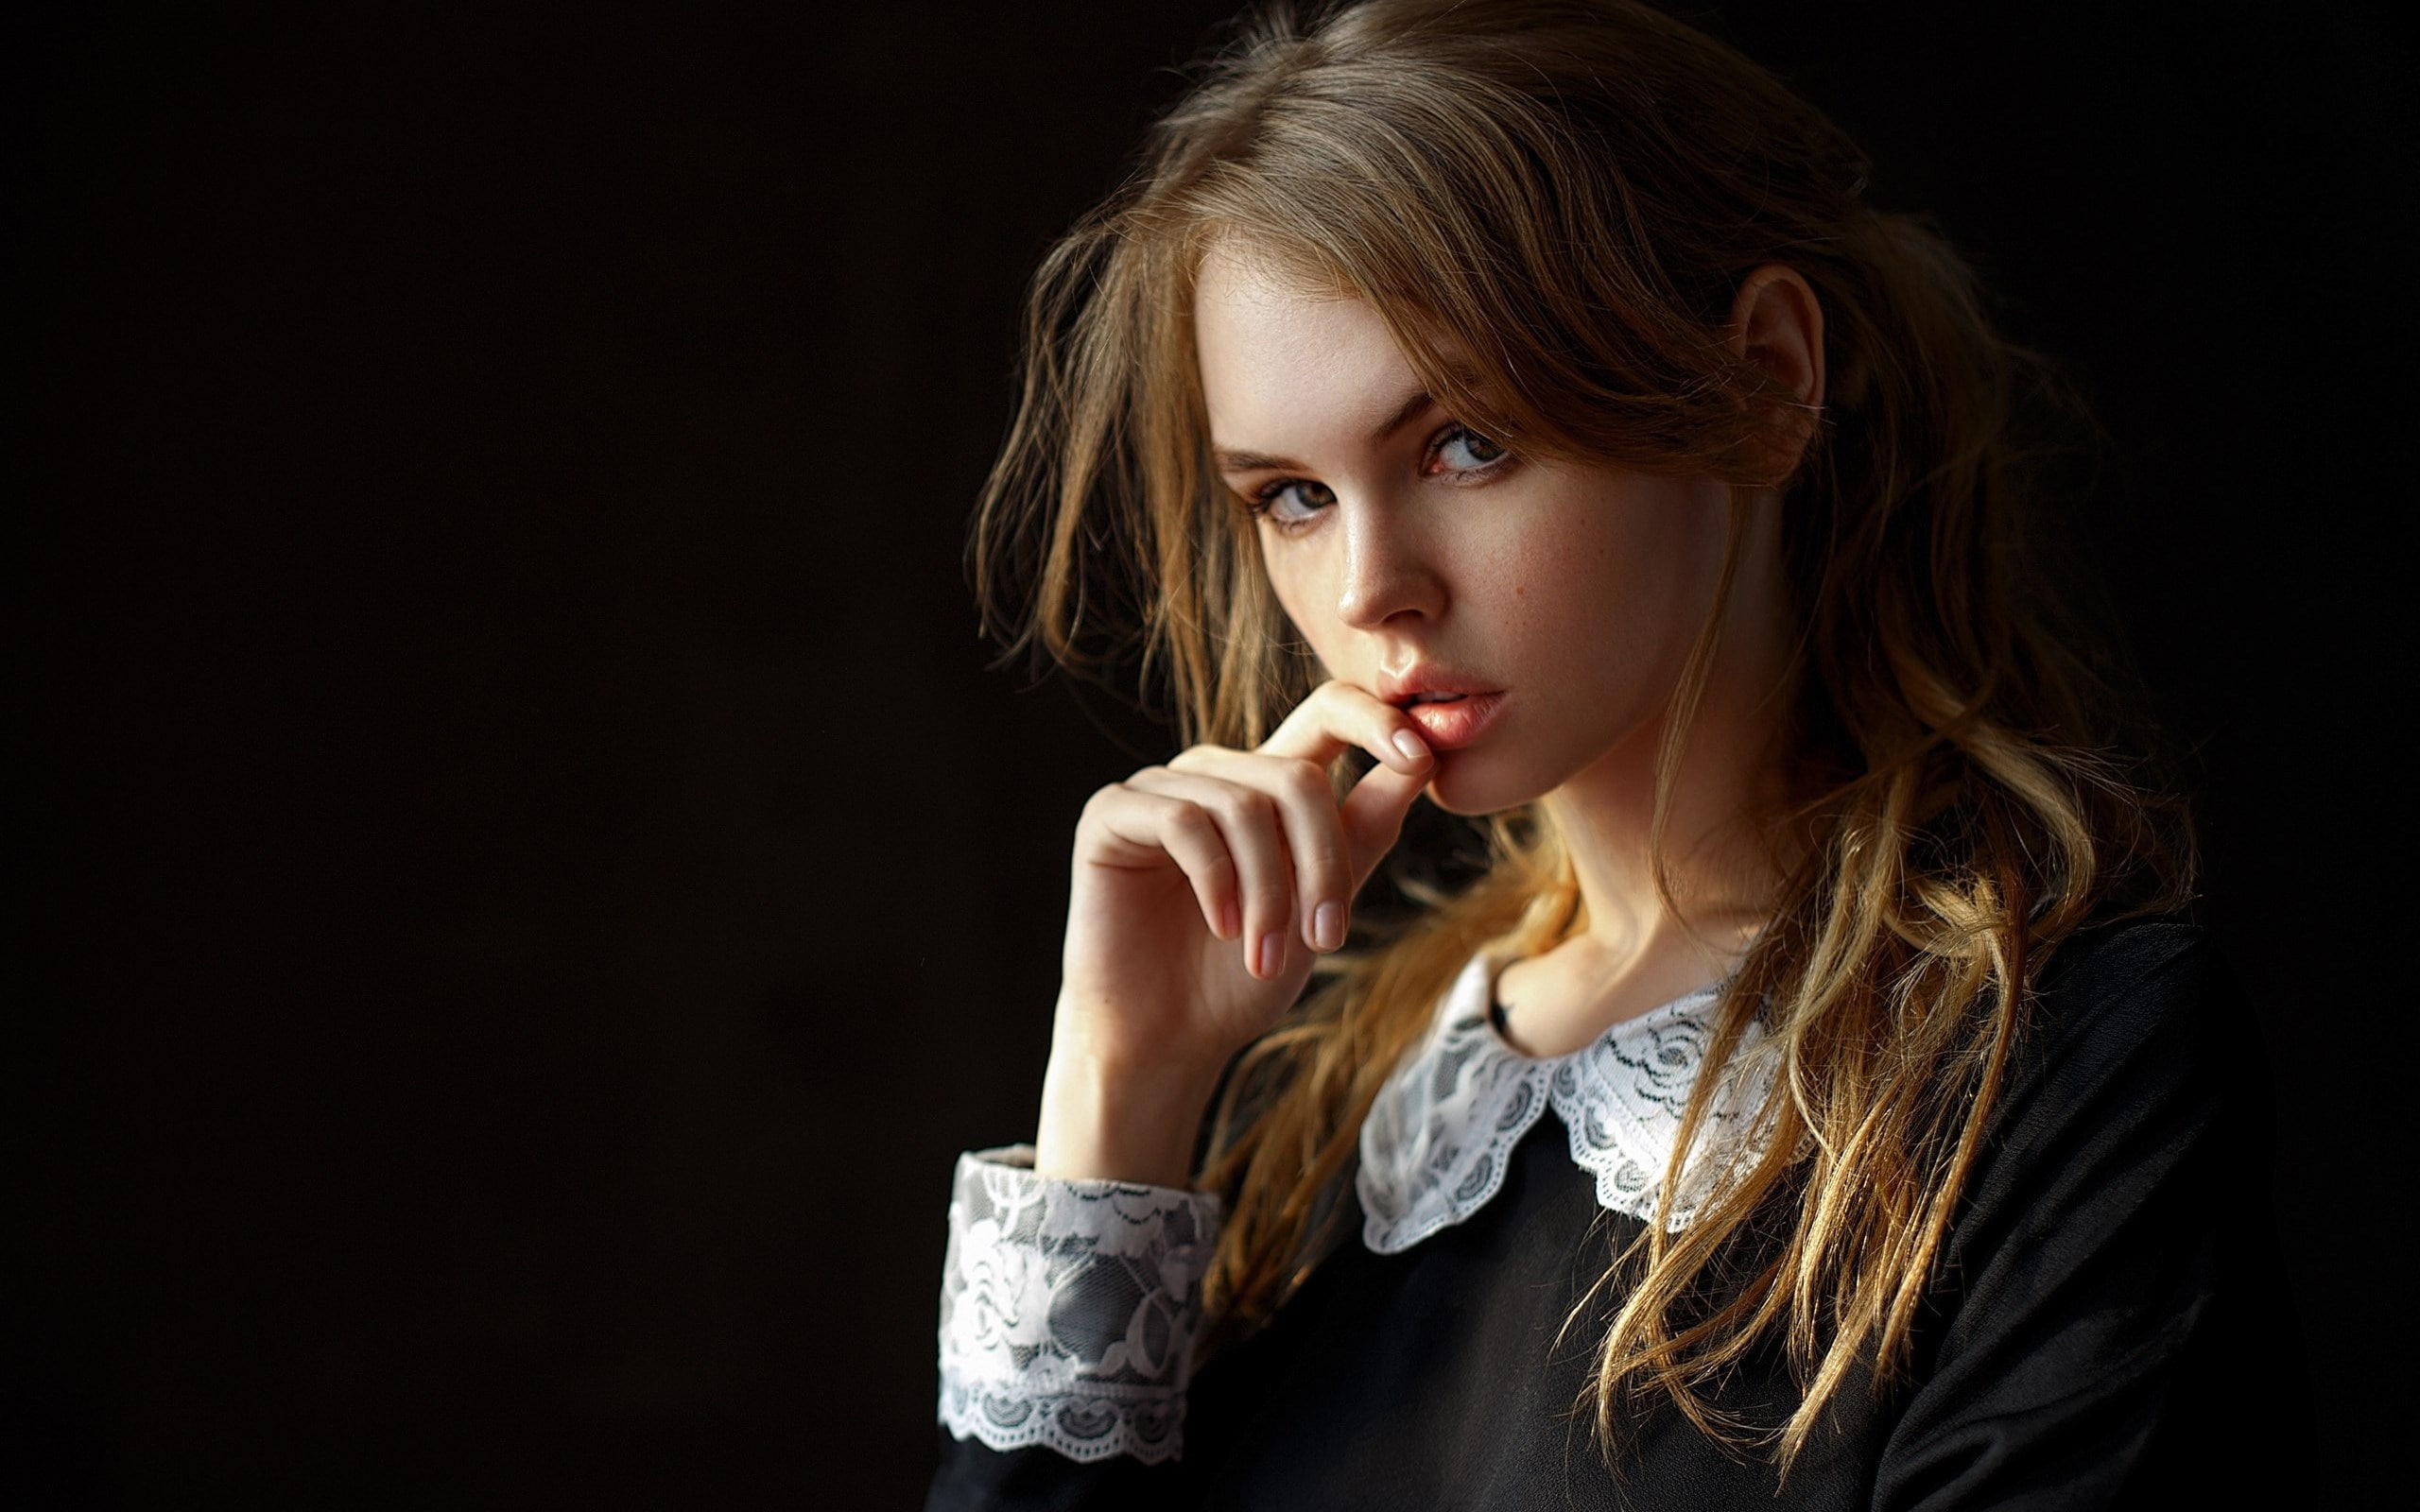 pretty girl images 2560x1600, portrait, black background, one person